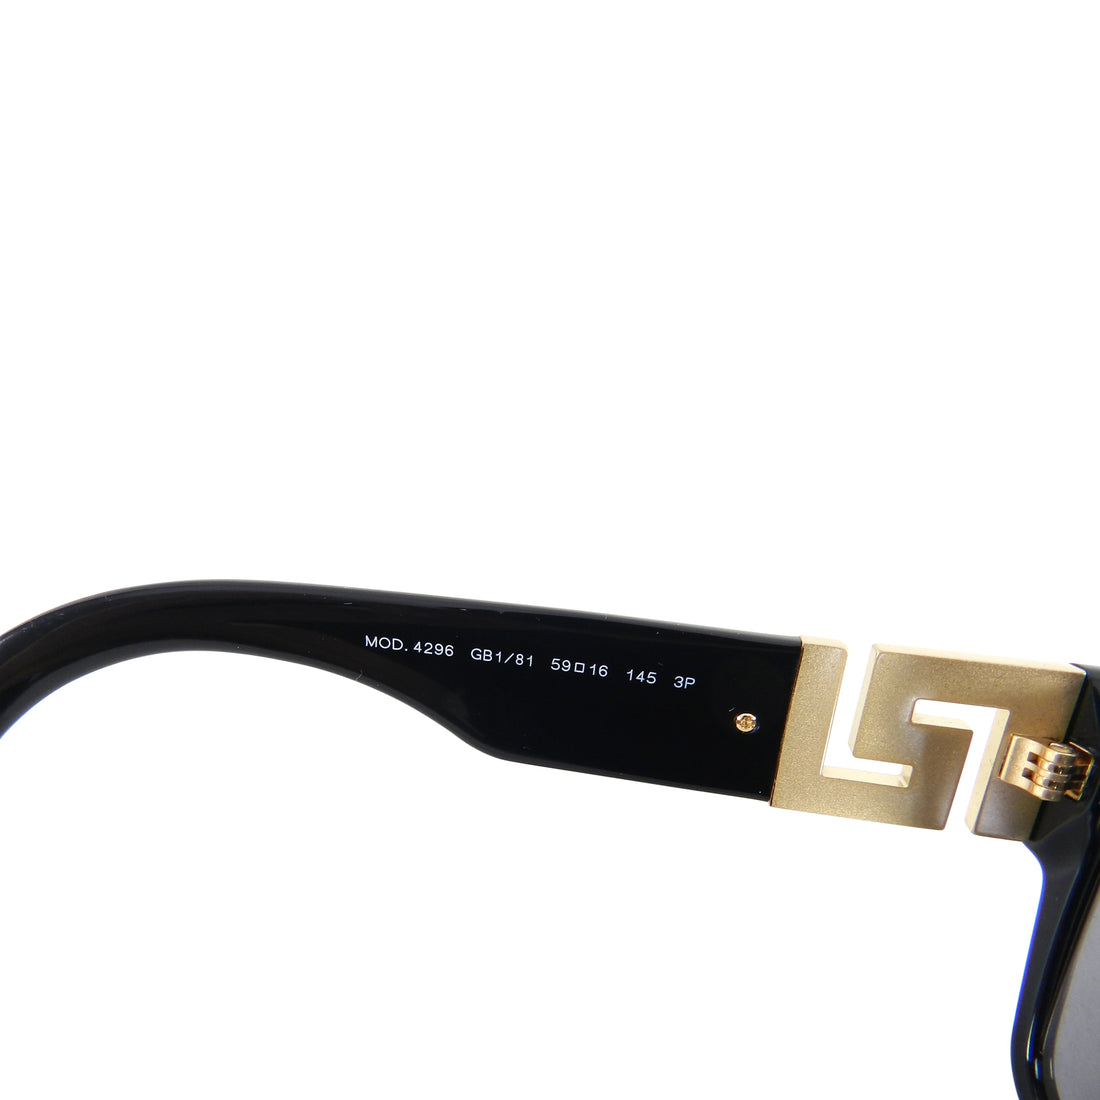 Versace Black Sunglasses with Gold Greek Key Sides 4296